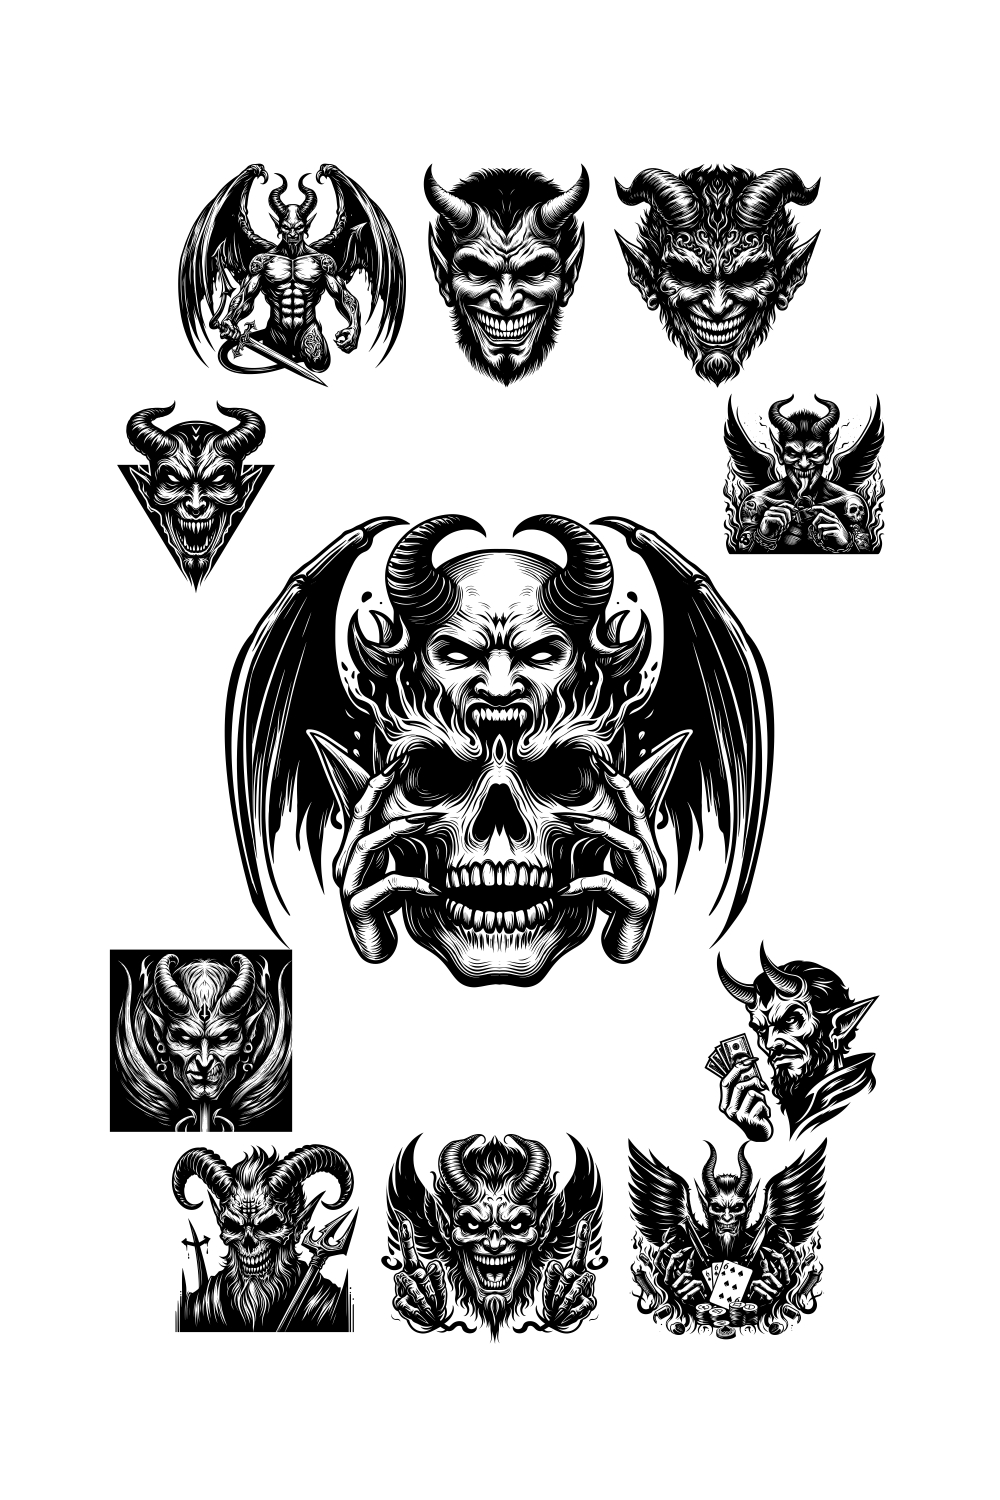 12 Illustration of a black and white devil - only 5$ pinterest preview image.